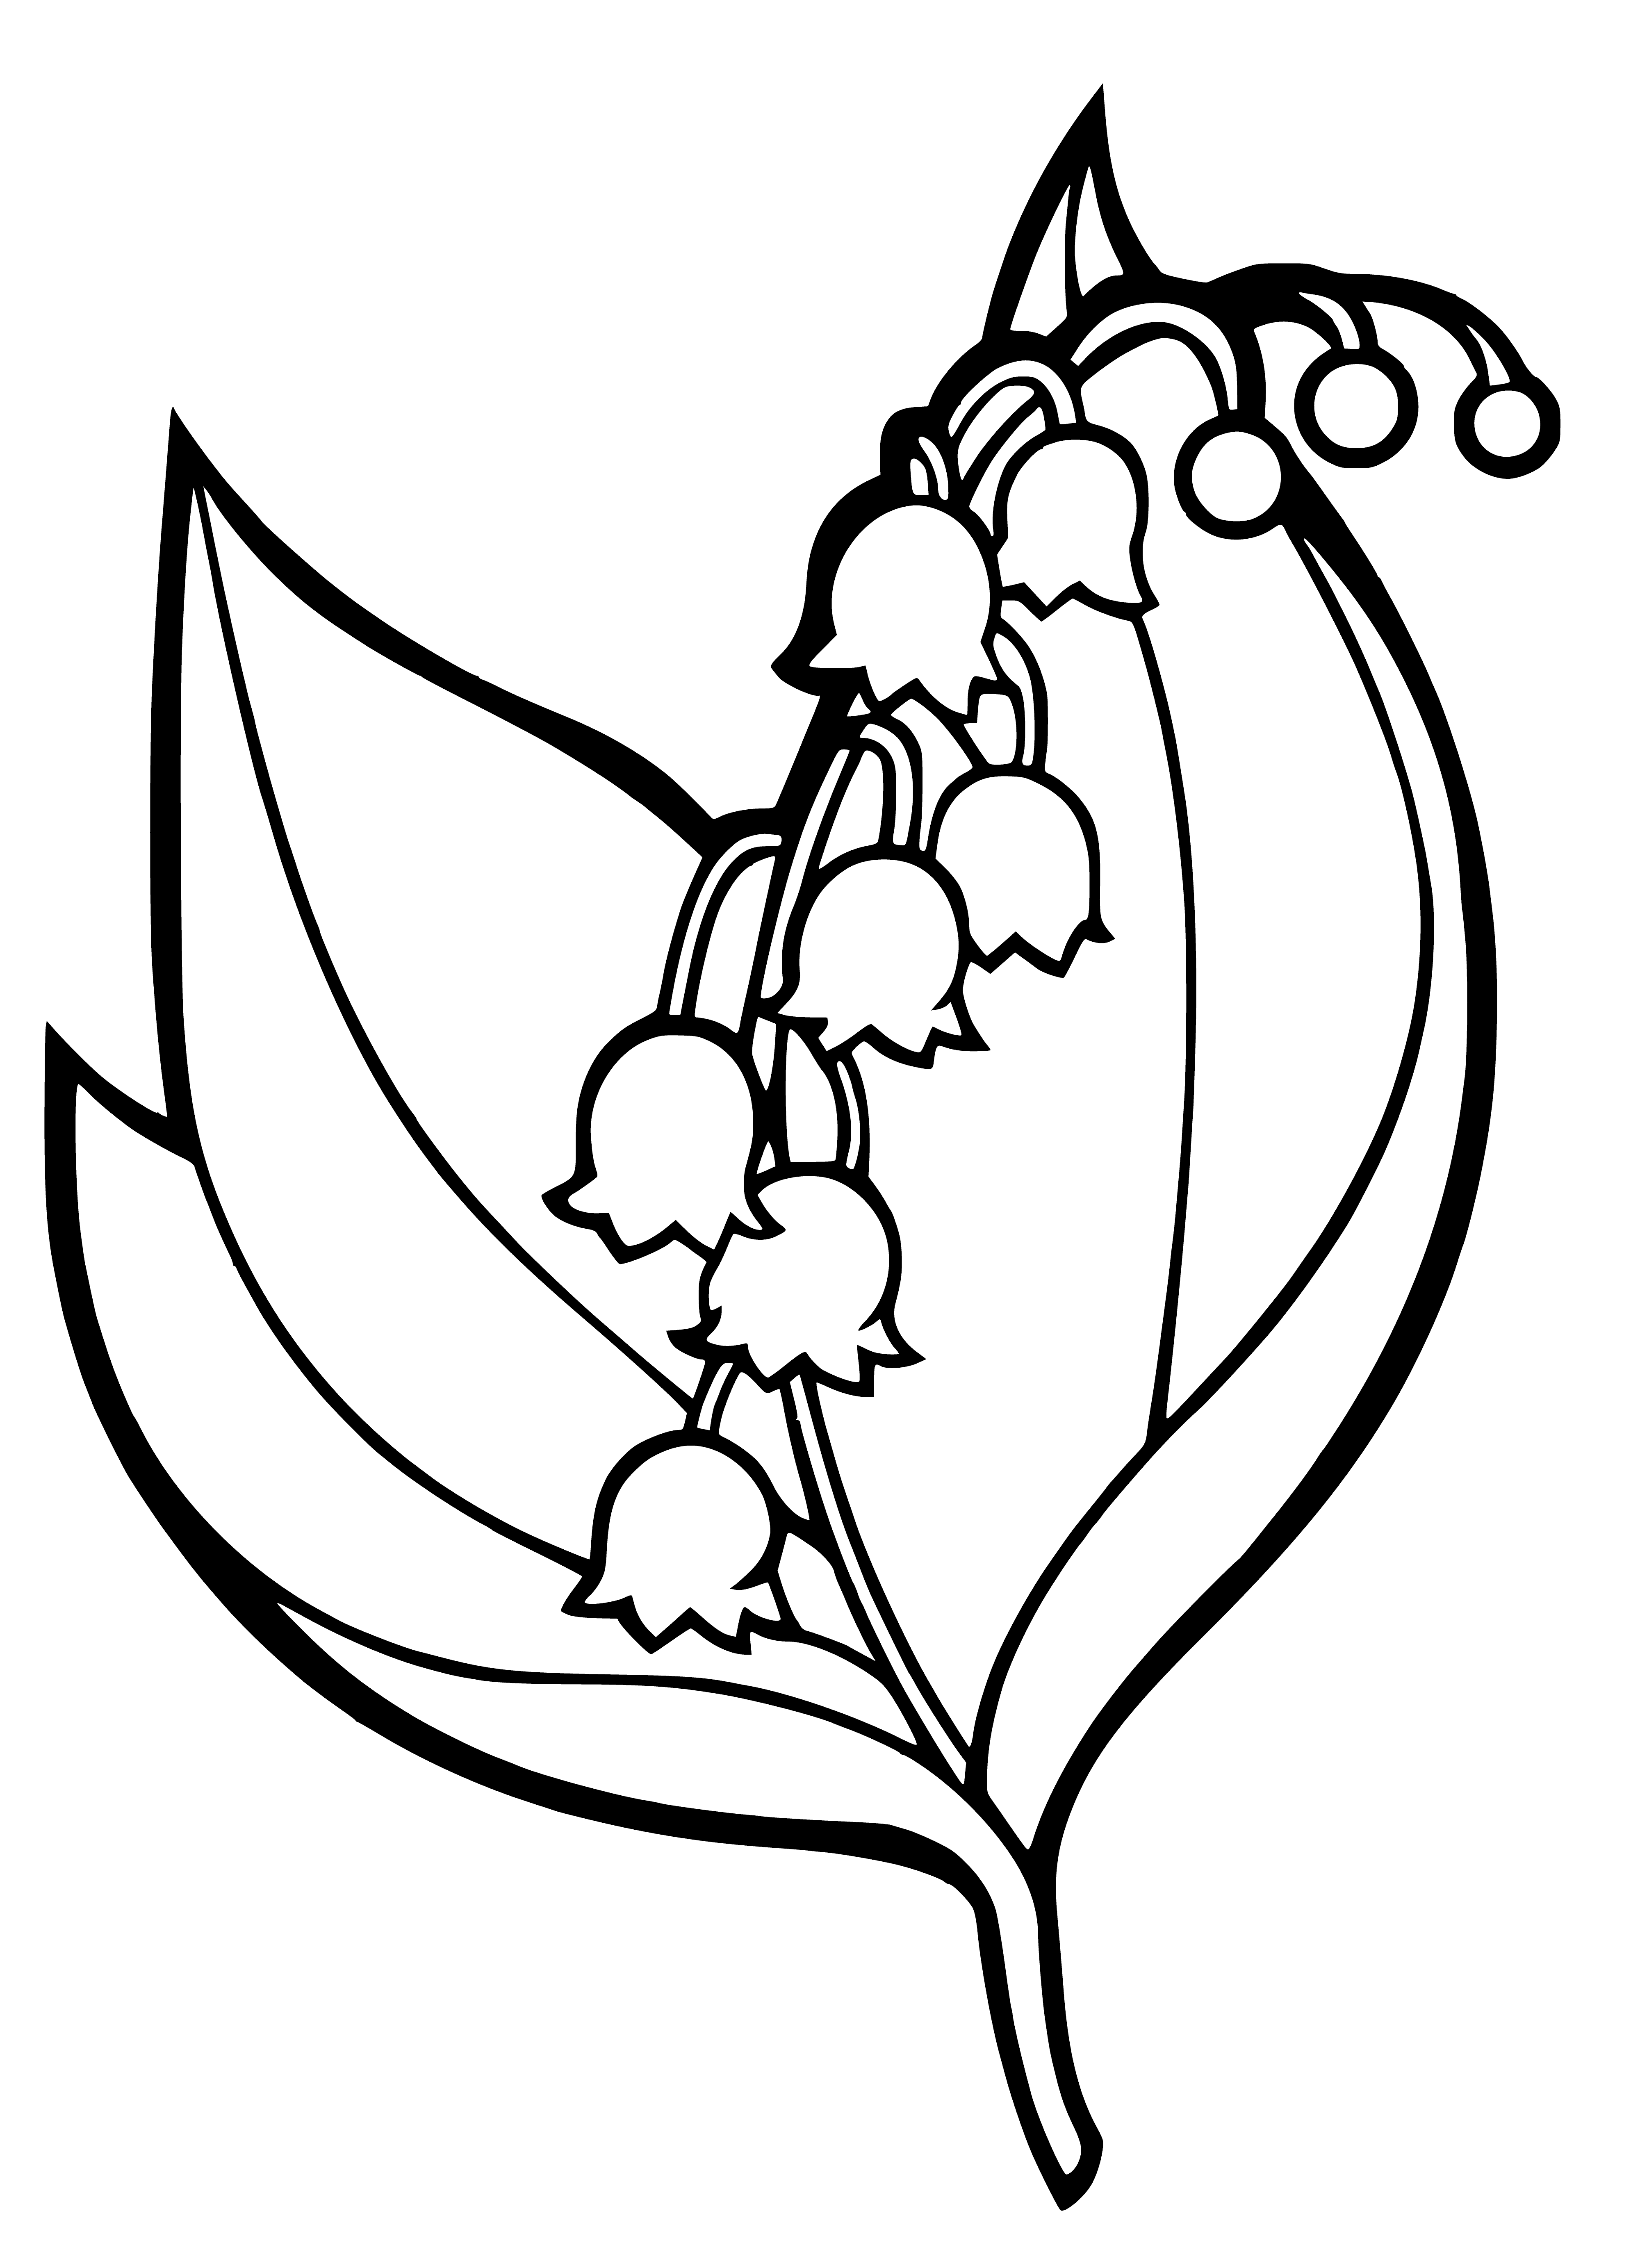 coloring page: Flower coloring page of lily of the valley: white w/ long stem, green leaves & sweet smell. #coloring #lilyofthevalley